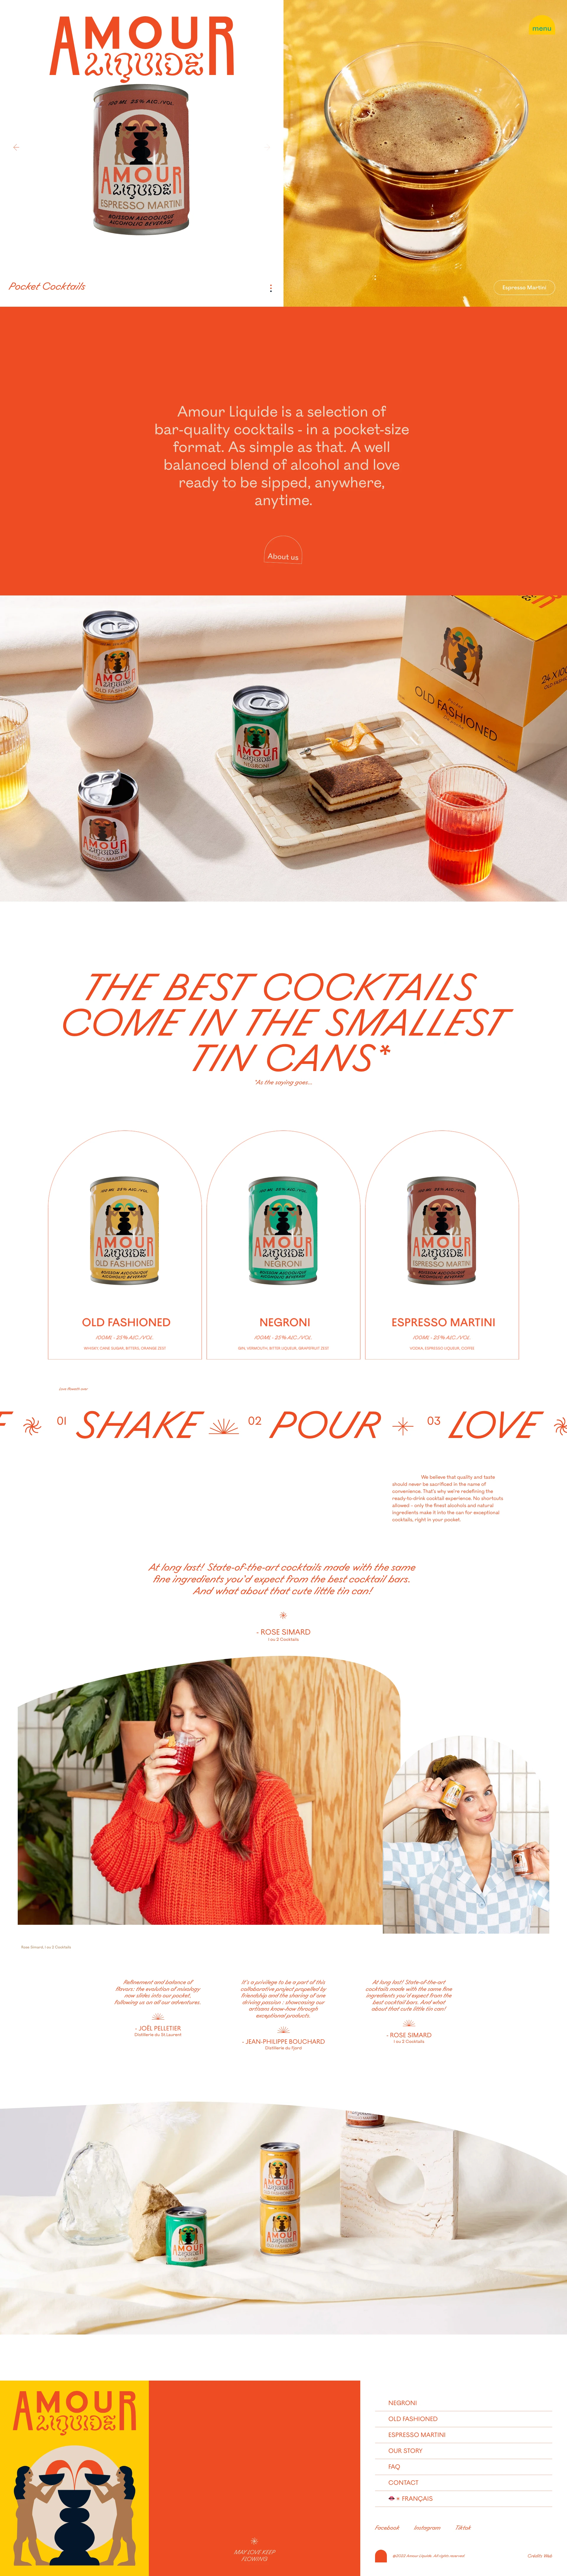 Amour Liquide Landing Page Example: Amour Liquide is a ready to drink (RTD) alcohol brand offering a selection of bar-quality cocktails - in a pocket-size format. Shake, Pour, Love.